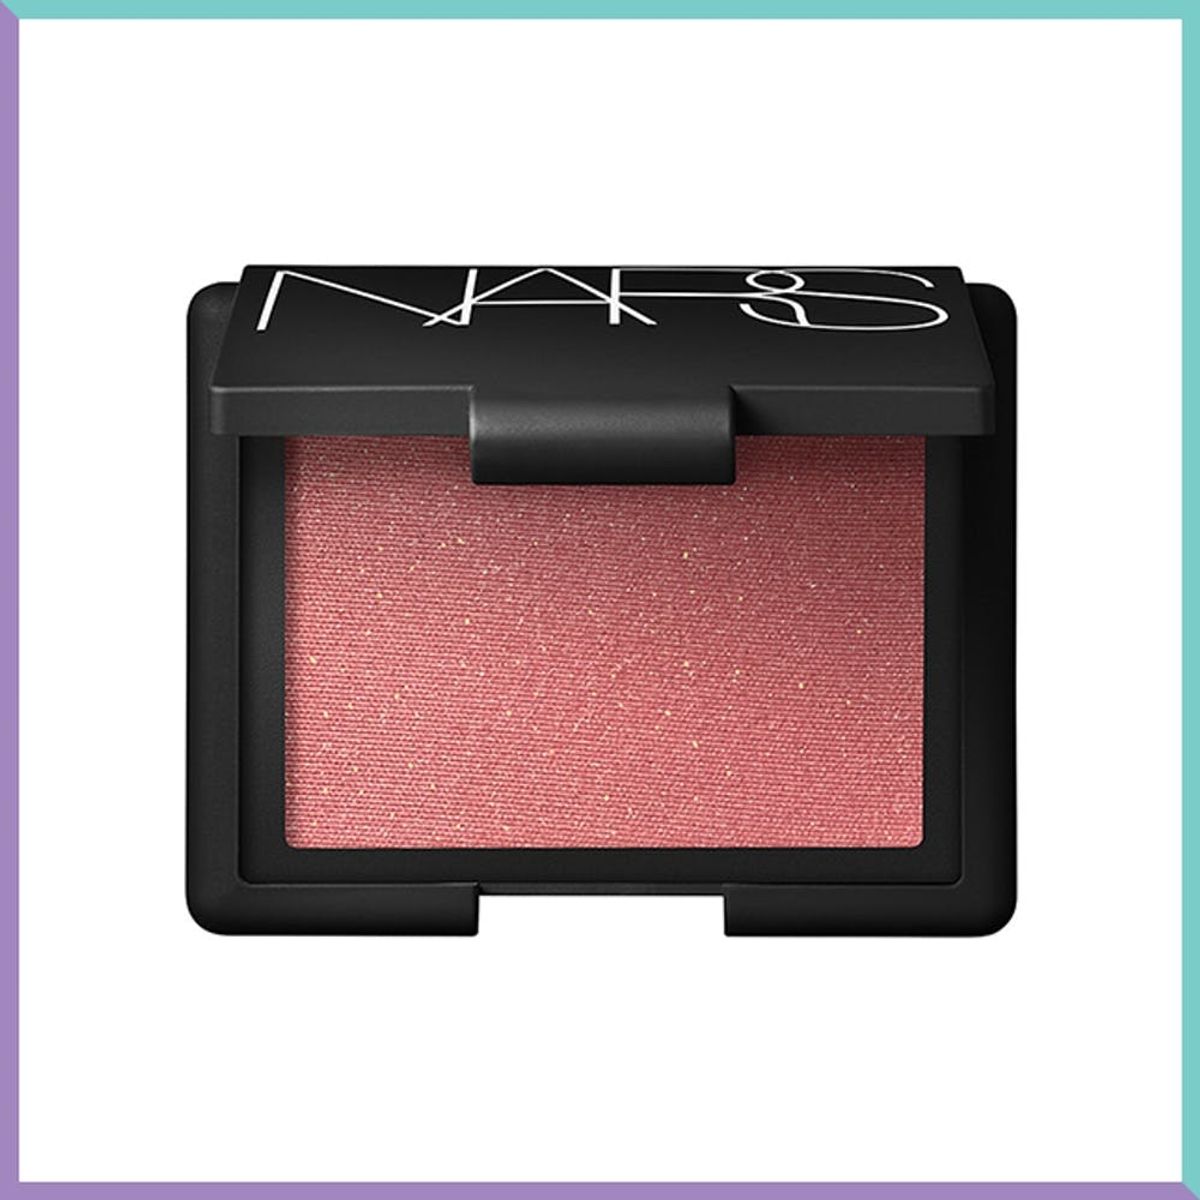 How to Find the Perfect Blush for Your Skin Tone